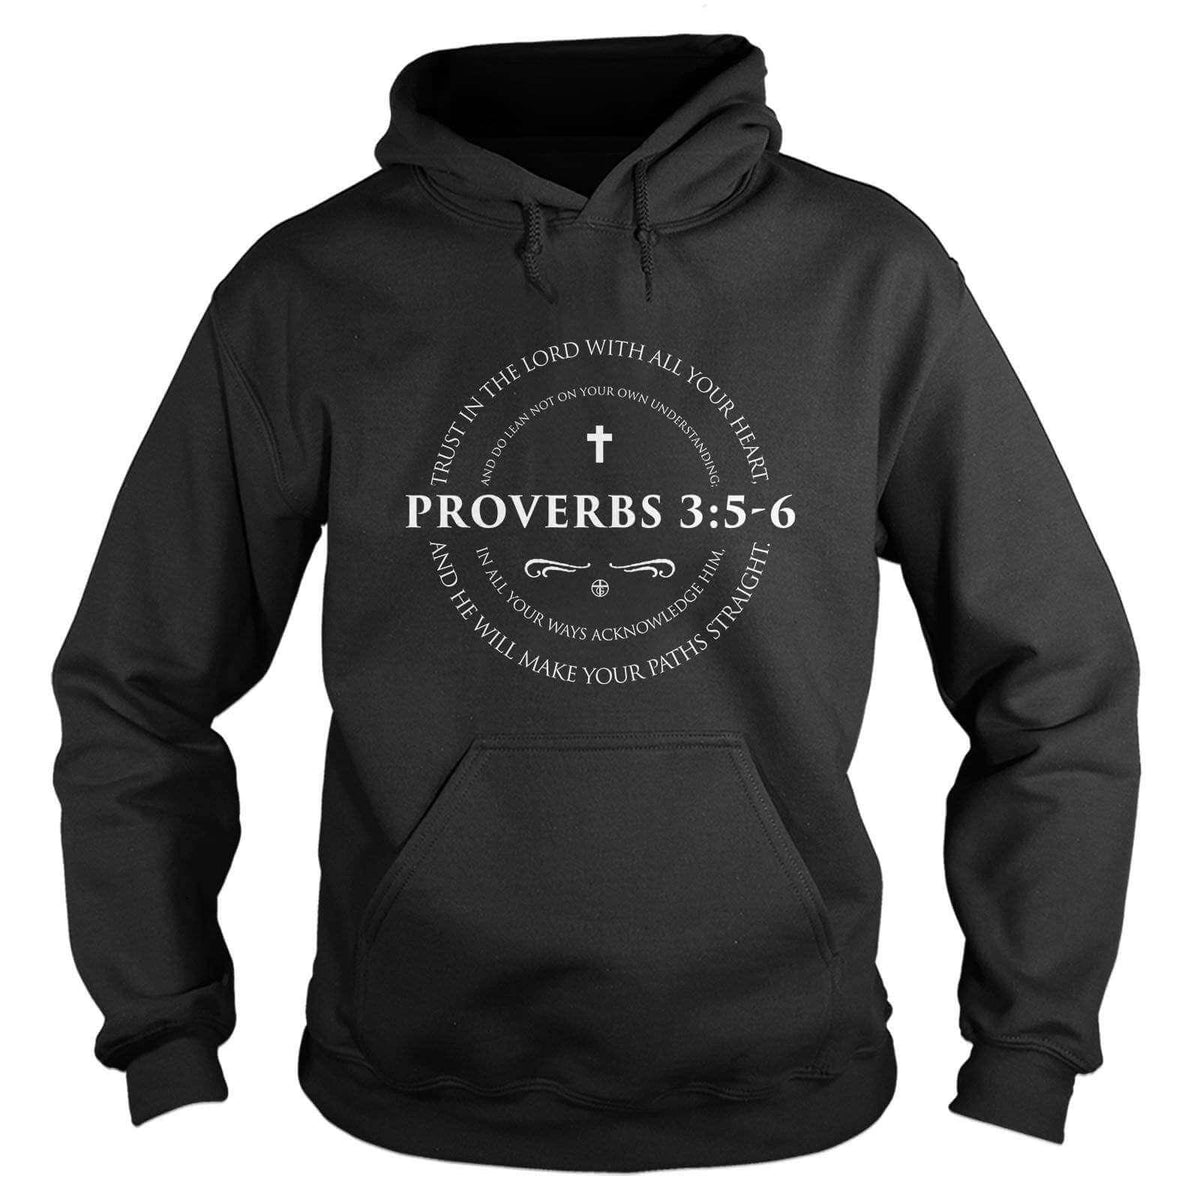 Proverbs 3:5-6 Hoodie - Our True God